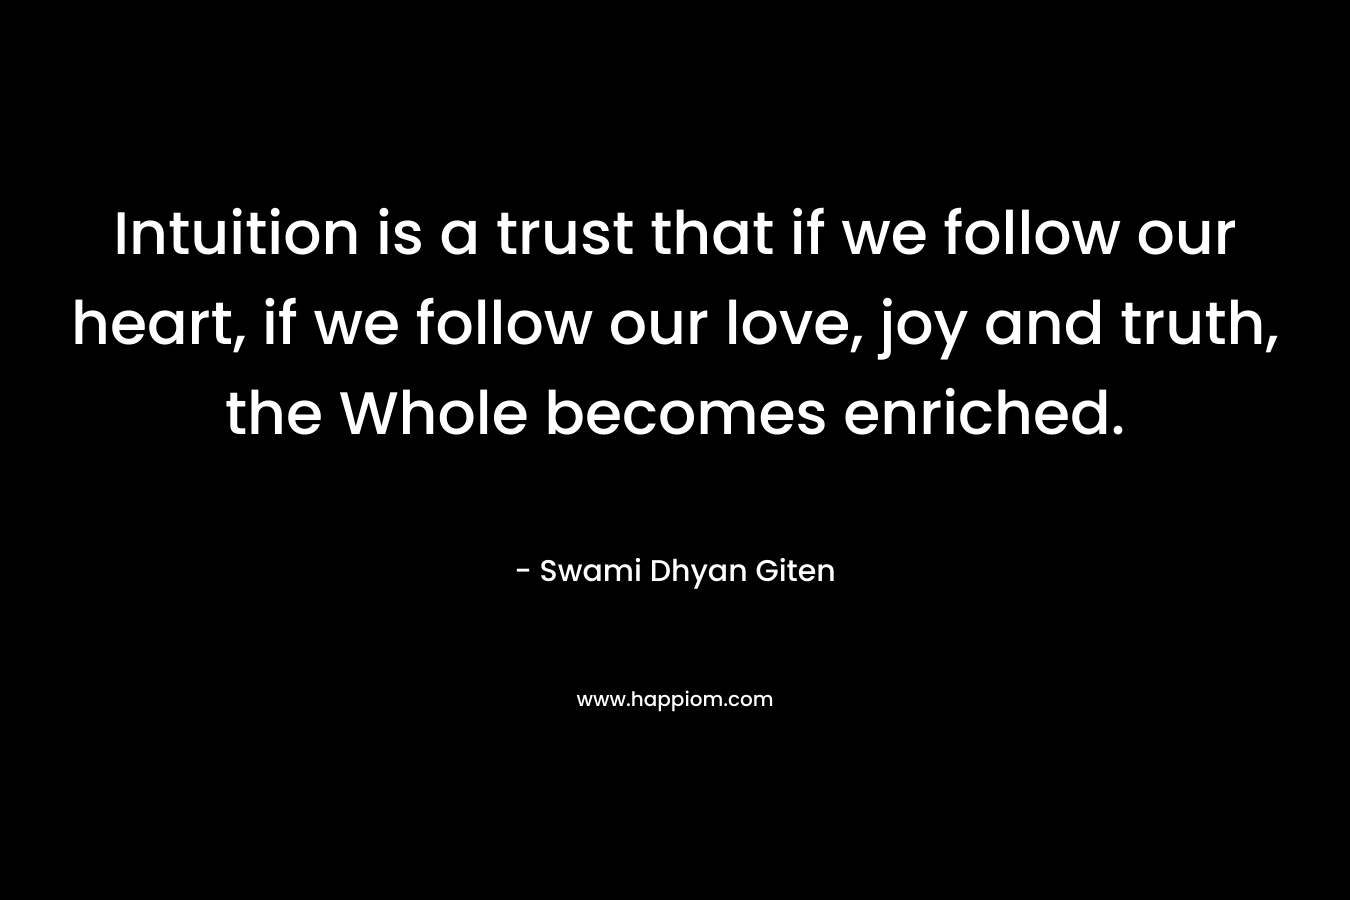 Intuition is a trust that if we follow our heart, if we follow our love, joy and truth, the Whole becomes enriched.